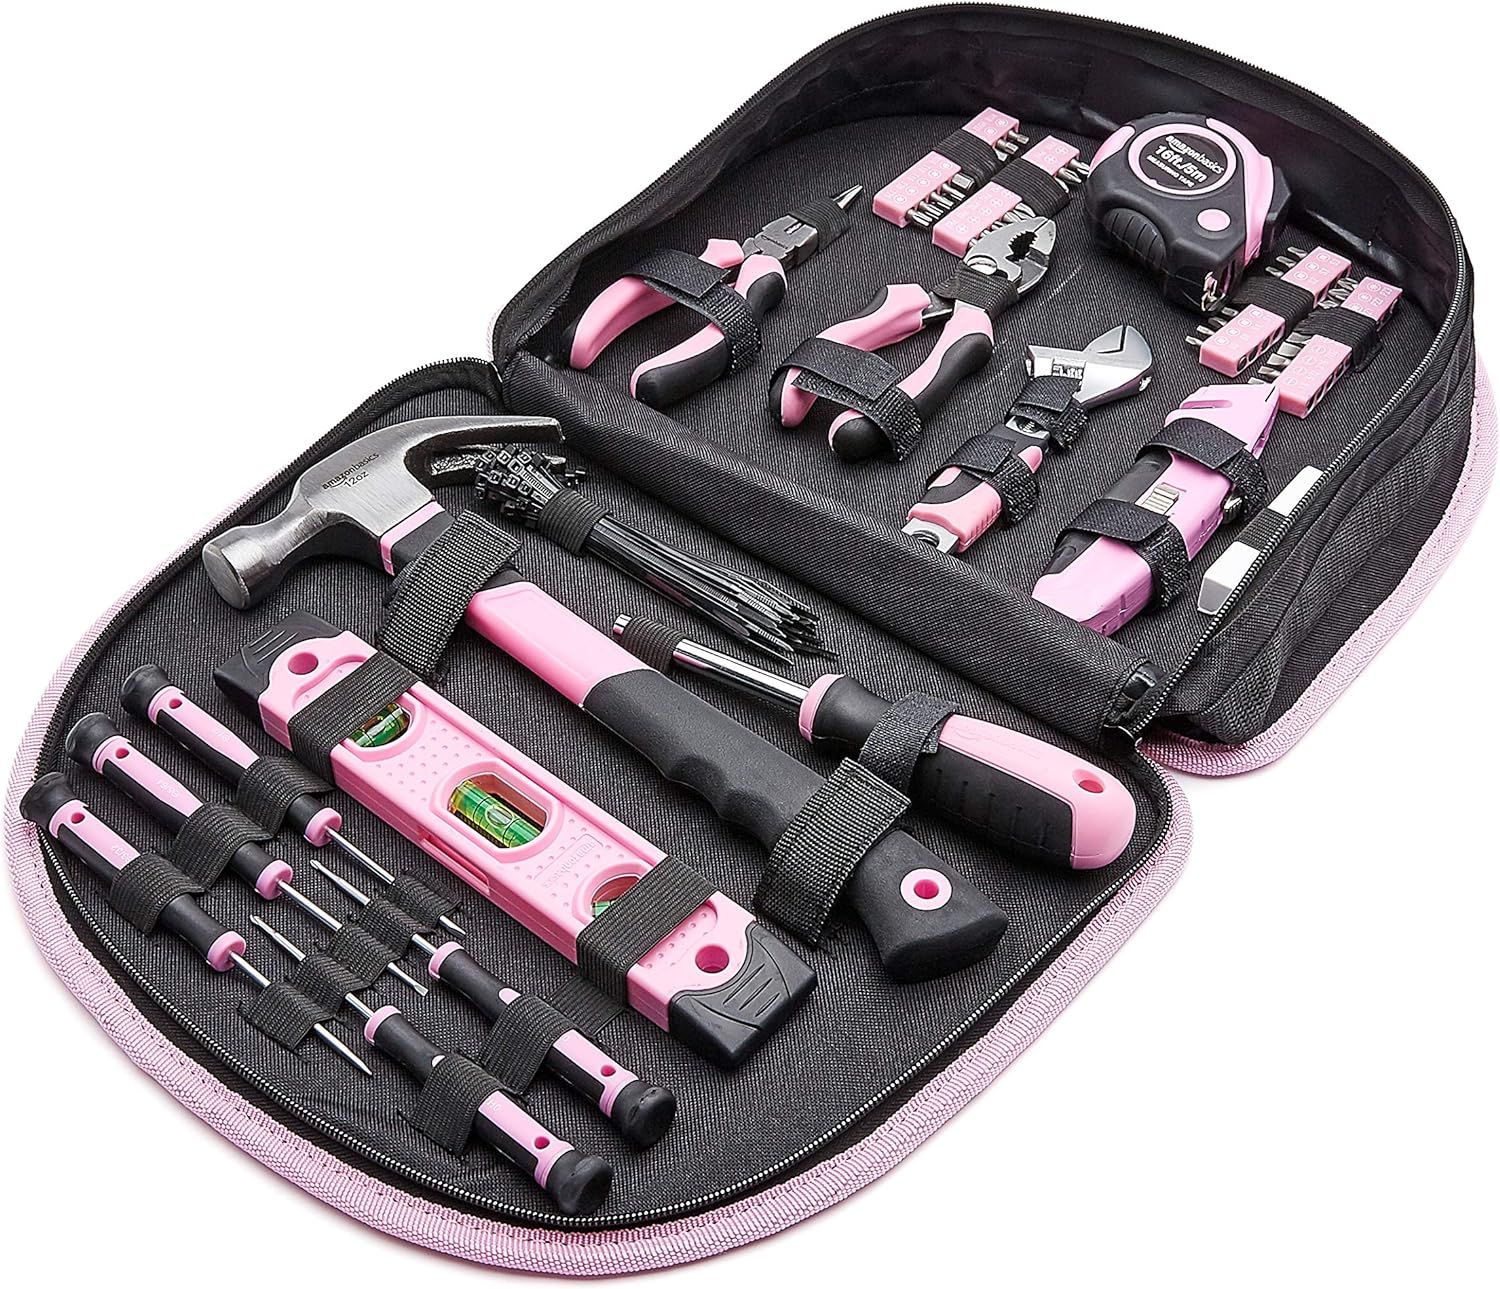 Amazon Basics Tool Set with Easy Carrying Round Pouch - 104-Piece, Pink | Amazon (US)